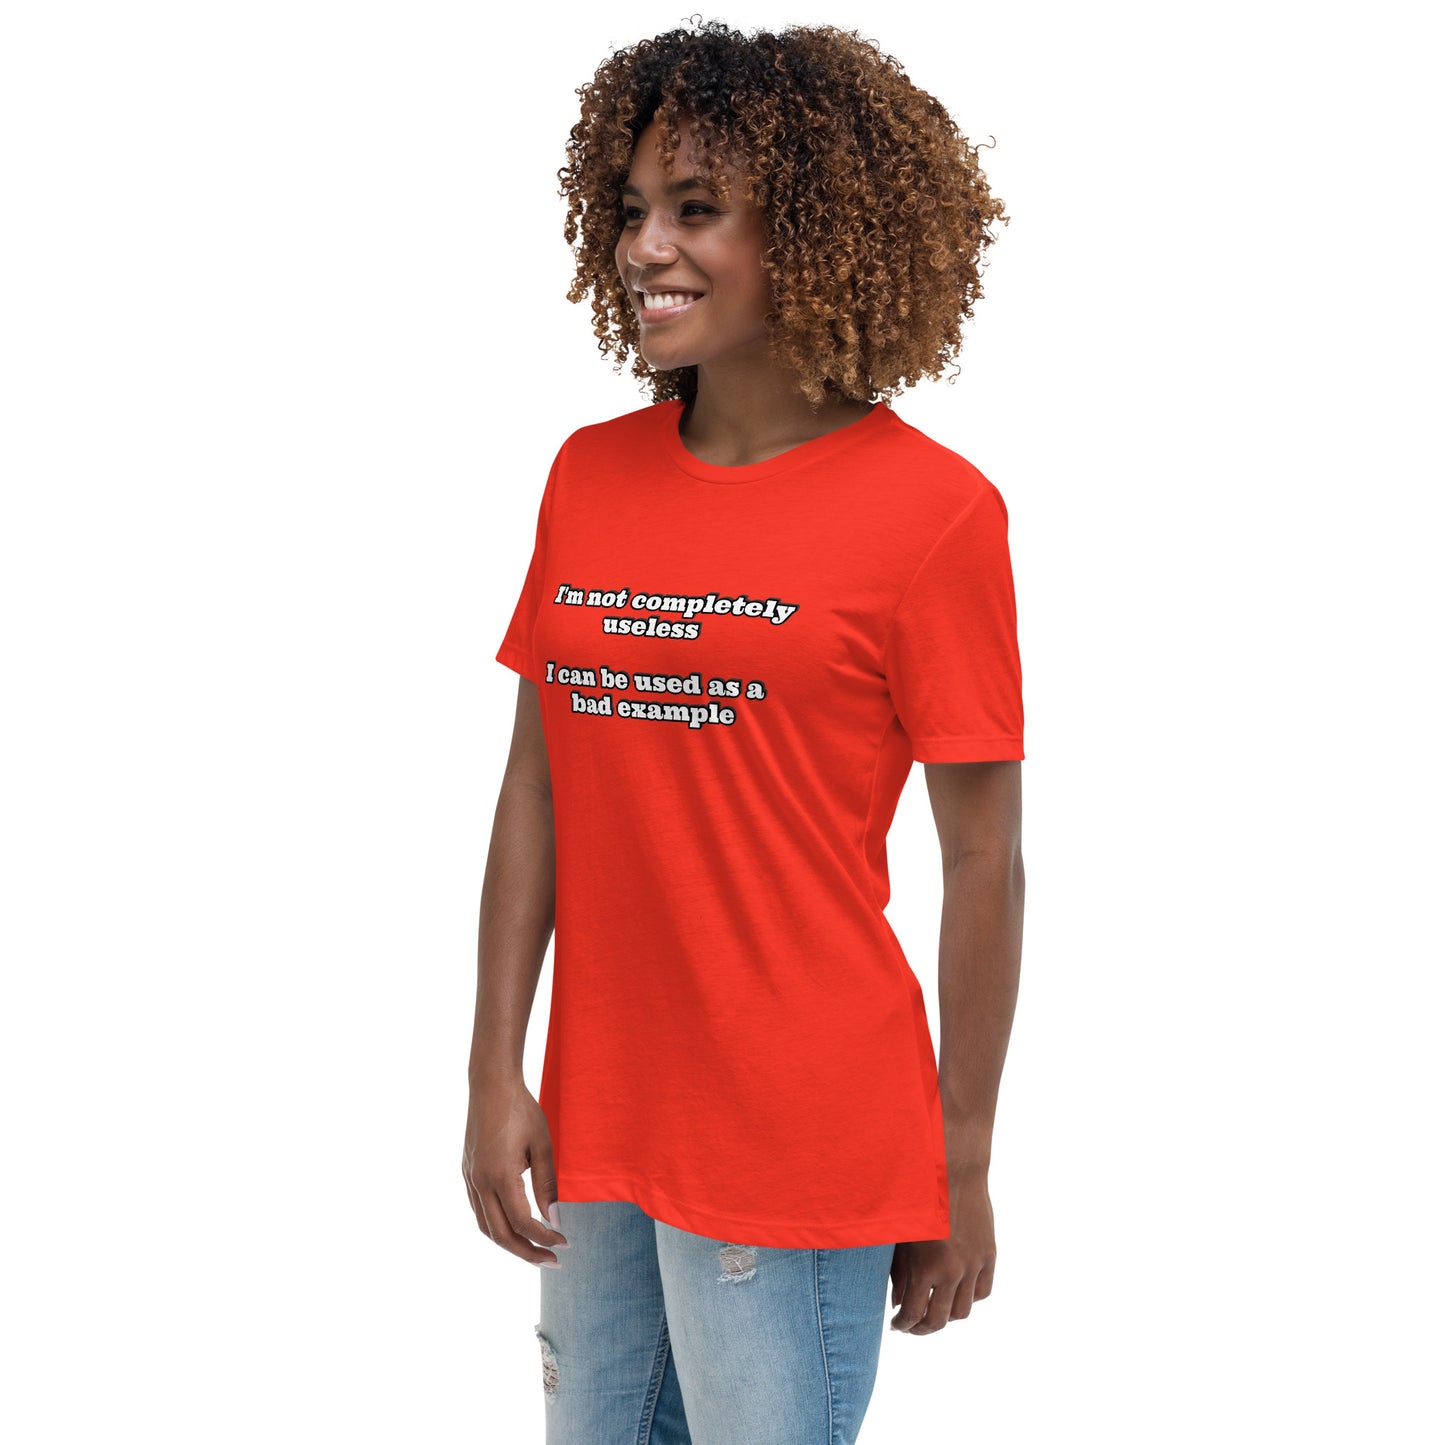 Women with red t-shirt with text “I'm not completely useless I can be used as a bad example”